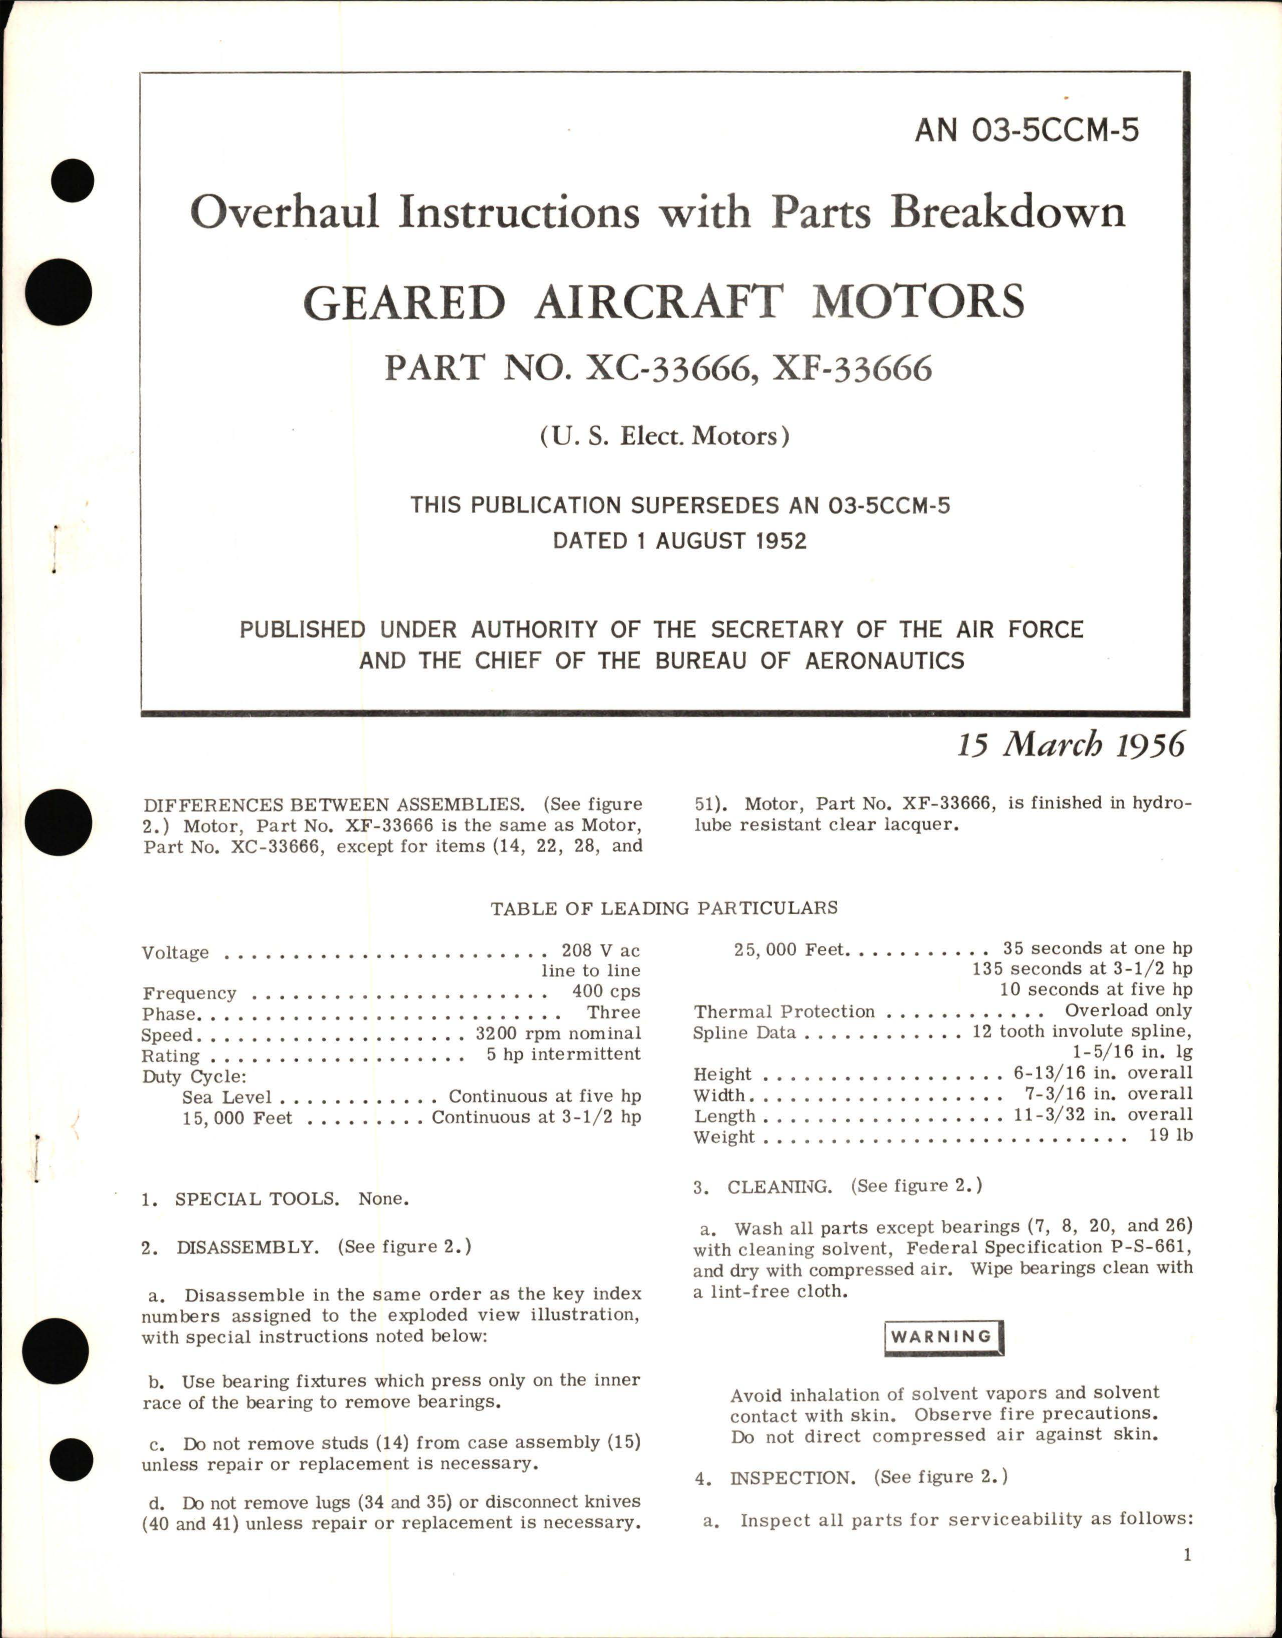 Sample page 1 from AirCorps Library document: Overhaul Instructions with Parts Breakdown for Geared Aircraft Motors - Part XC-3666 and XF-33666 